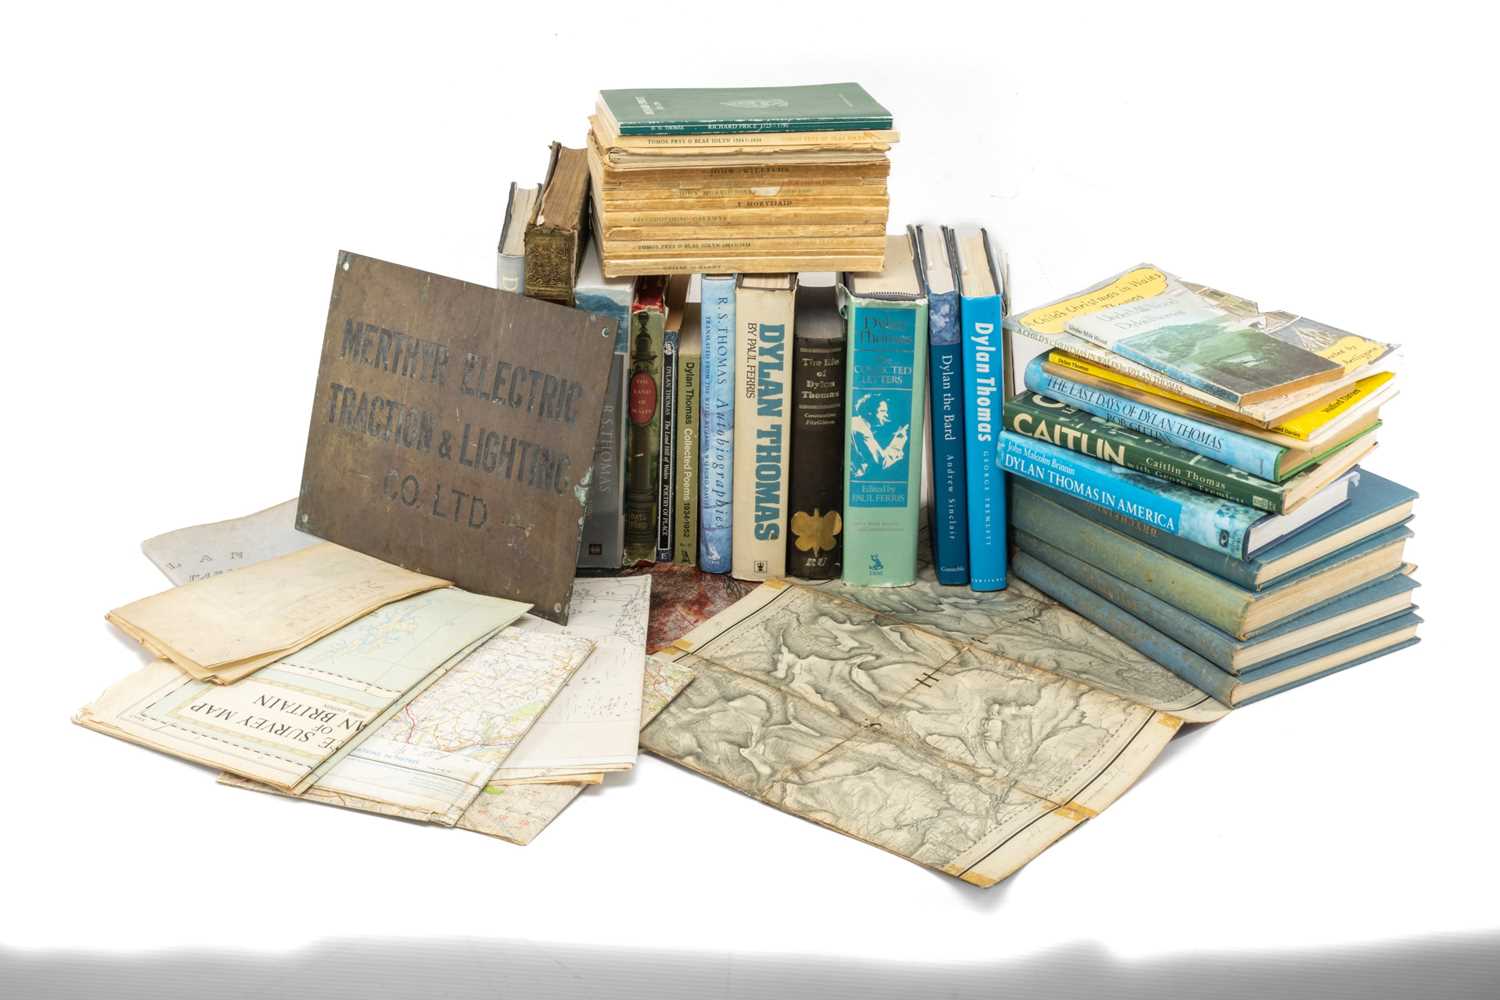 WELSH INTEREST LARGE COLLECTION OF WELSH LITERATURE AND EPHEMERA, including a brass plaque from